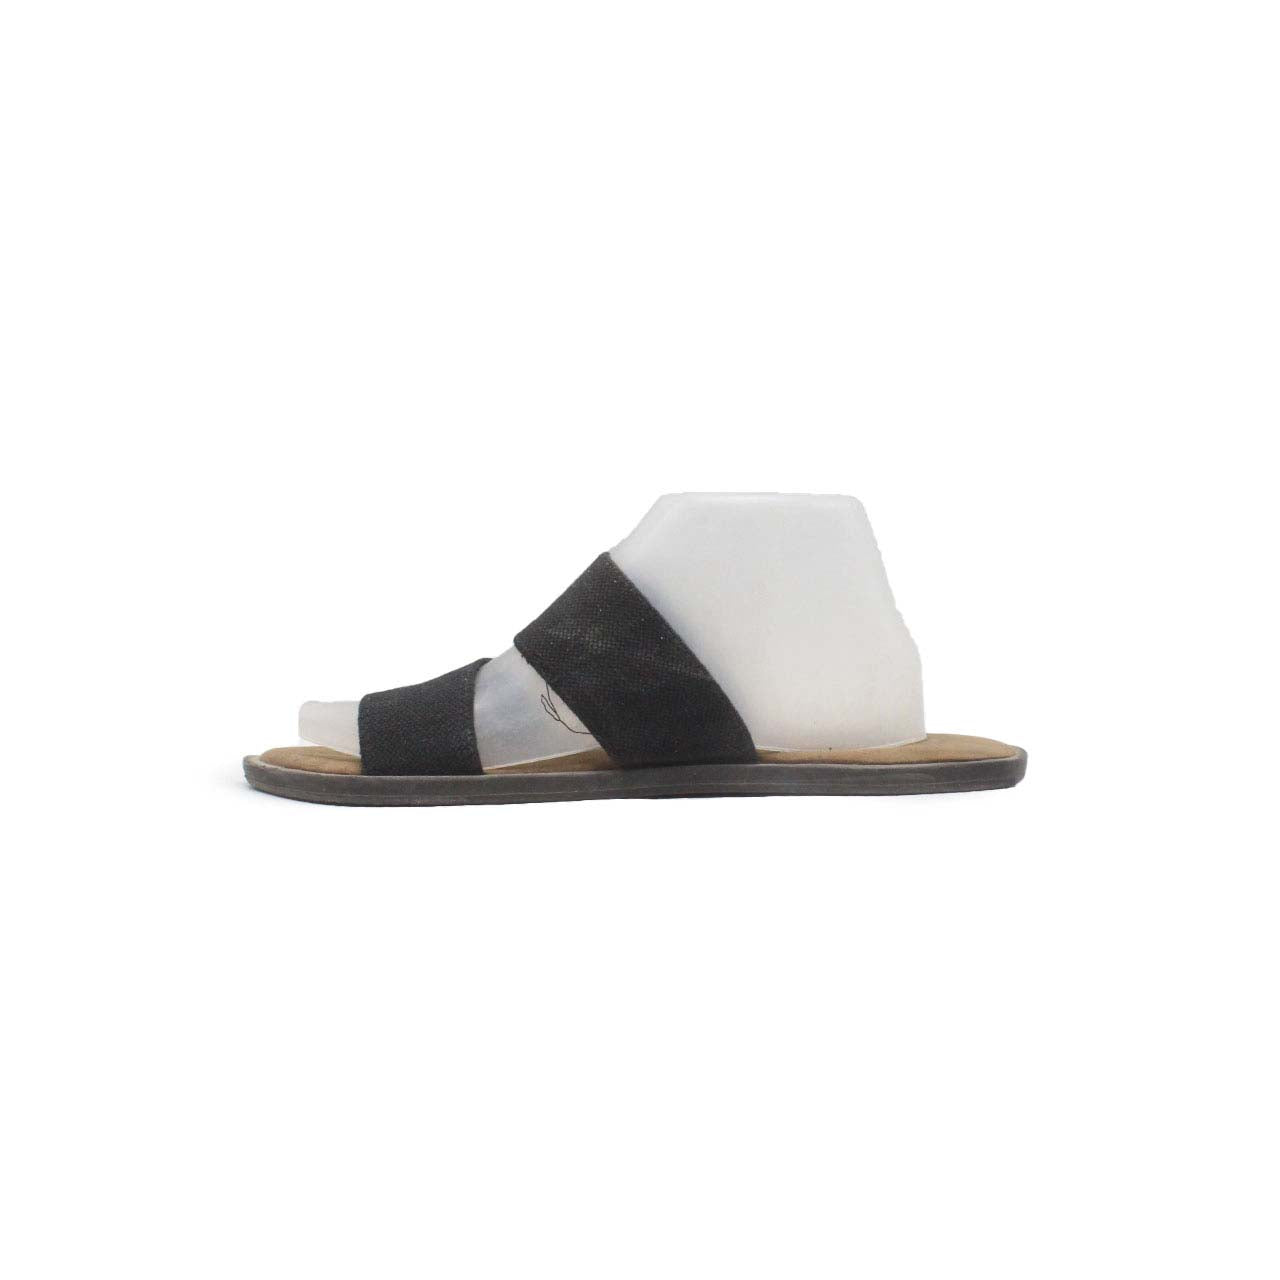 CLASSIC BLACK CASUAL SLIPPERS